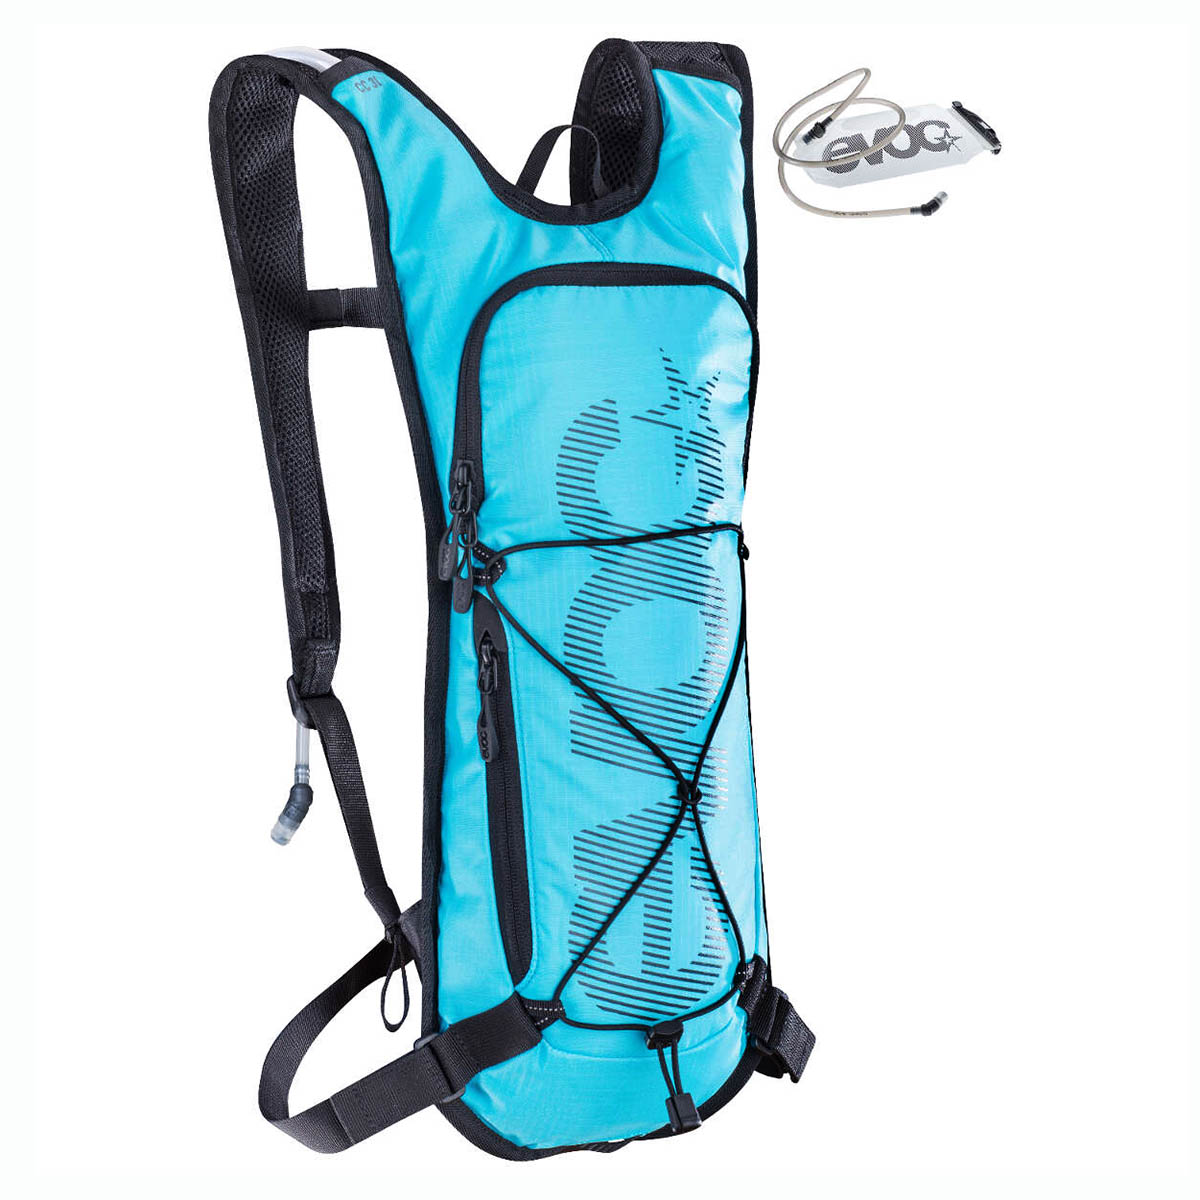 Evoc Backpack with Hydration System Cross Country Neon Blue, 3 Liter